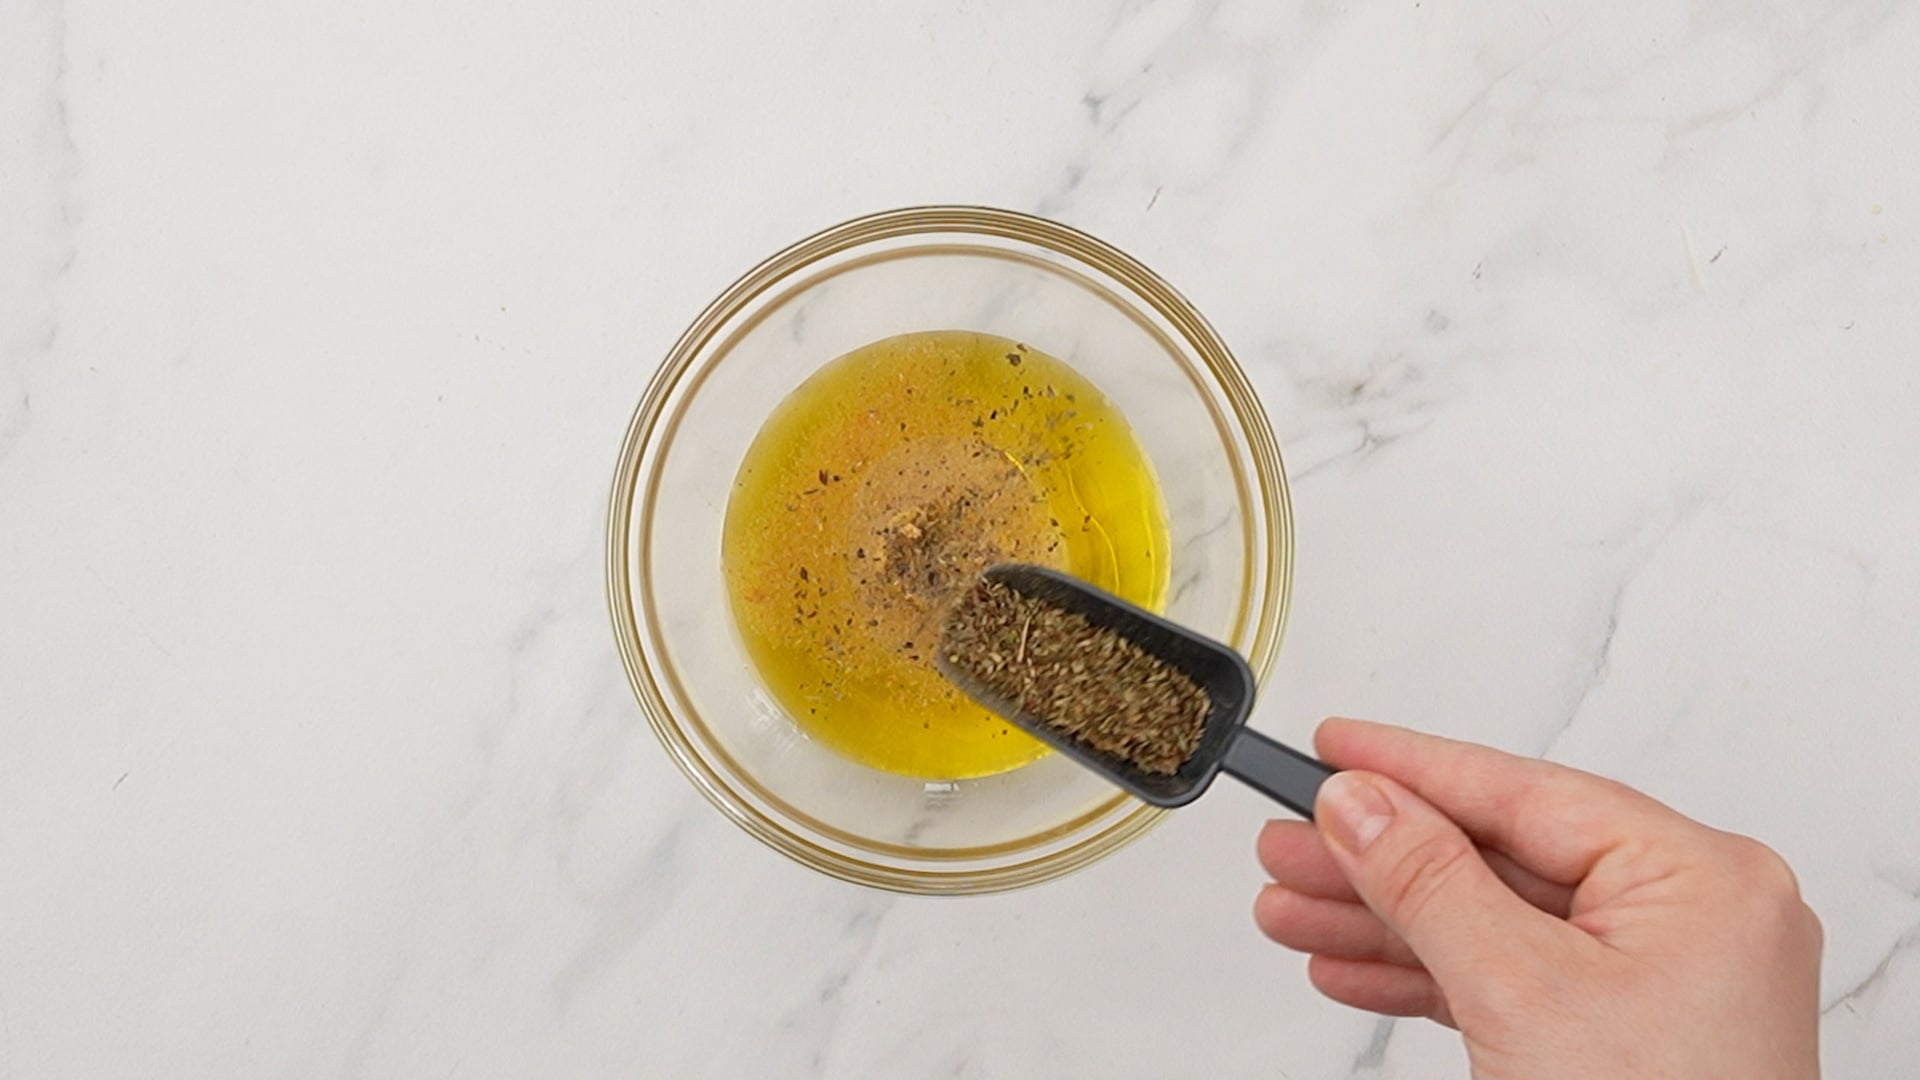 seasoning being added to bowl of oil